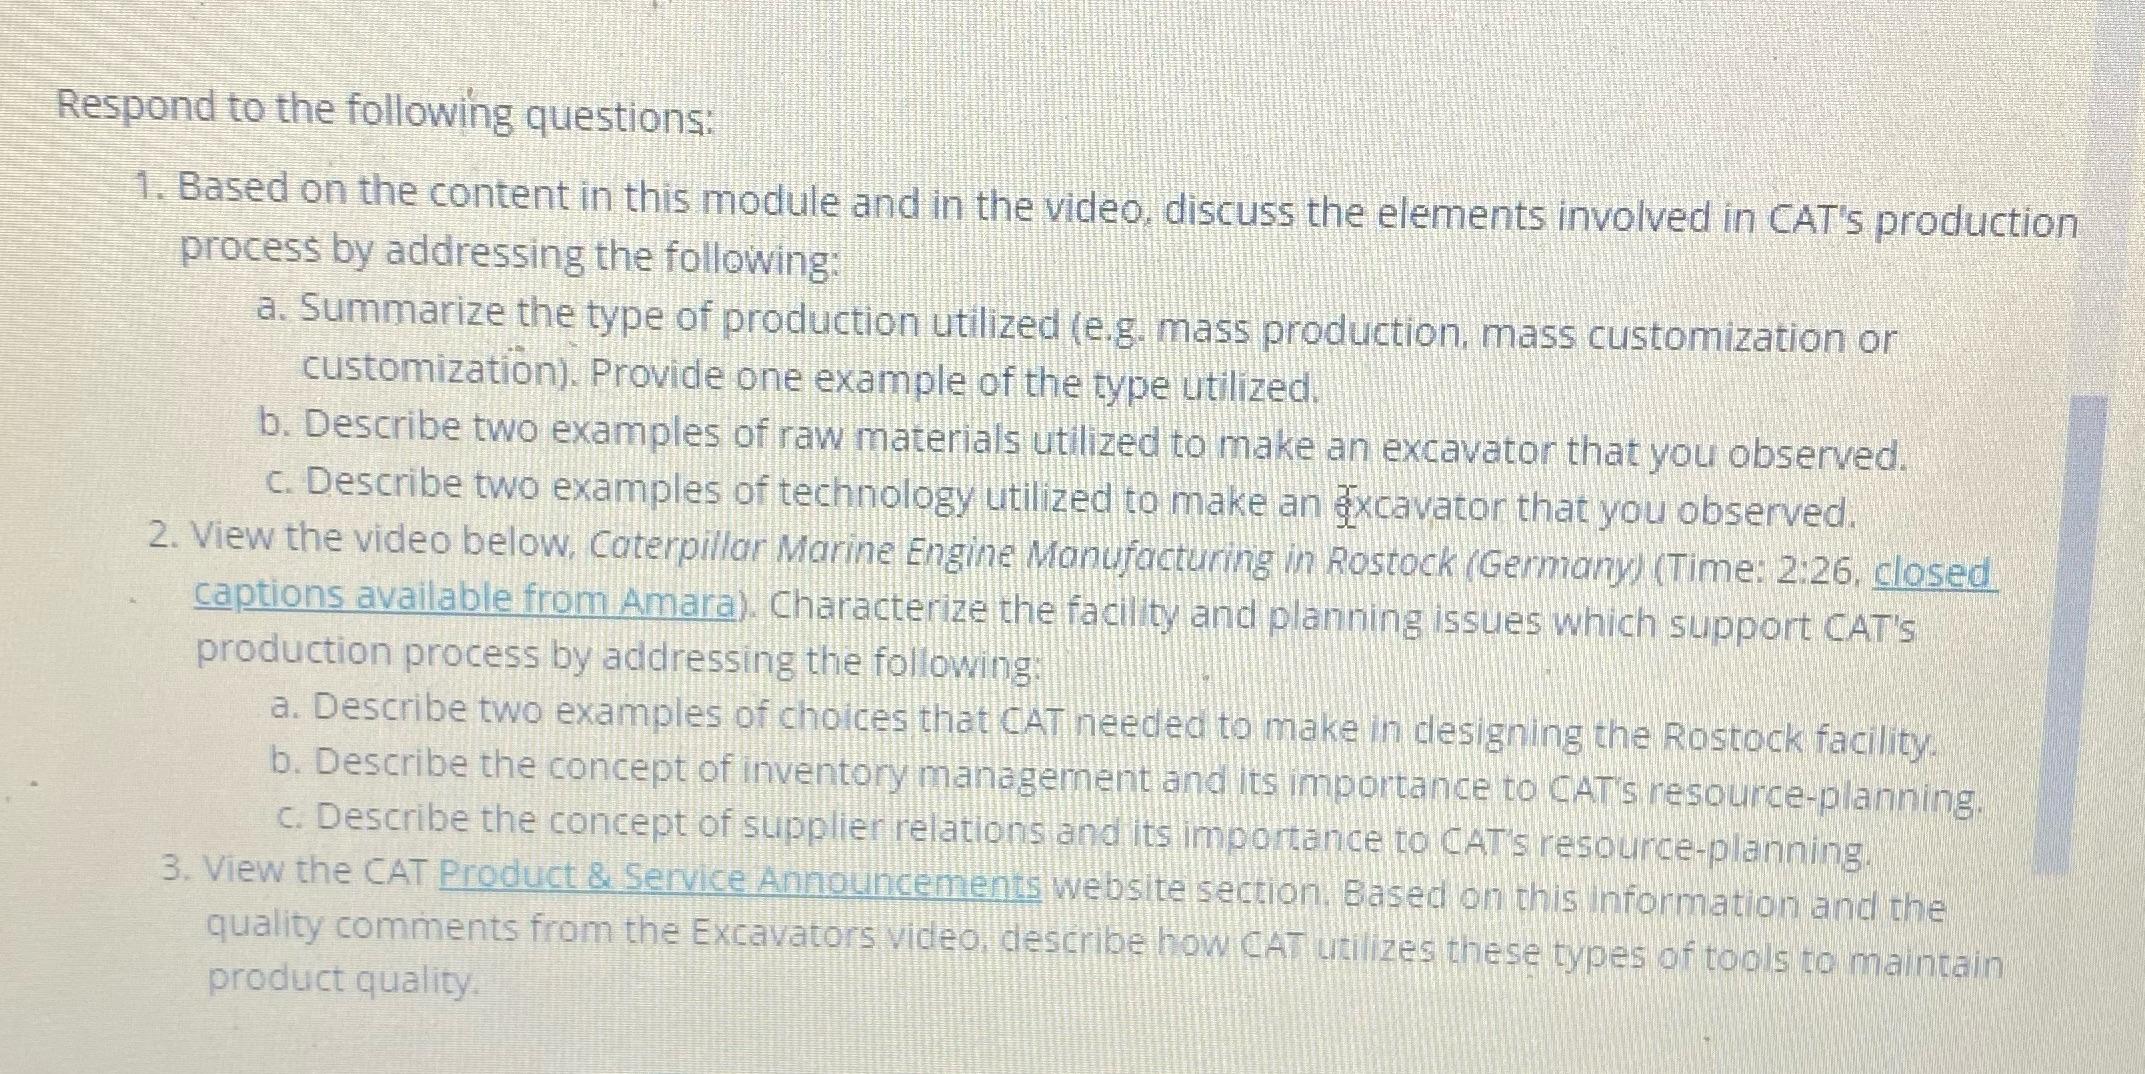 Respond to the following questions: 1. Based on the content in this module and in the video, discuss the